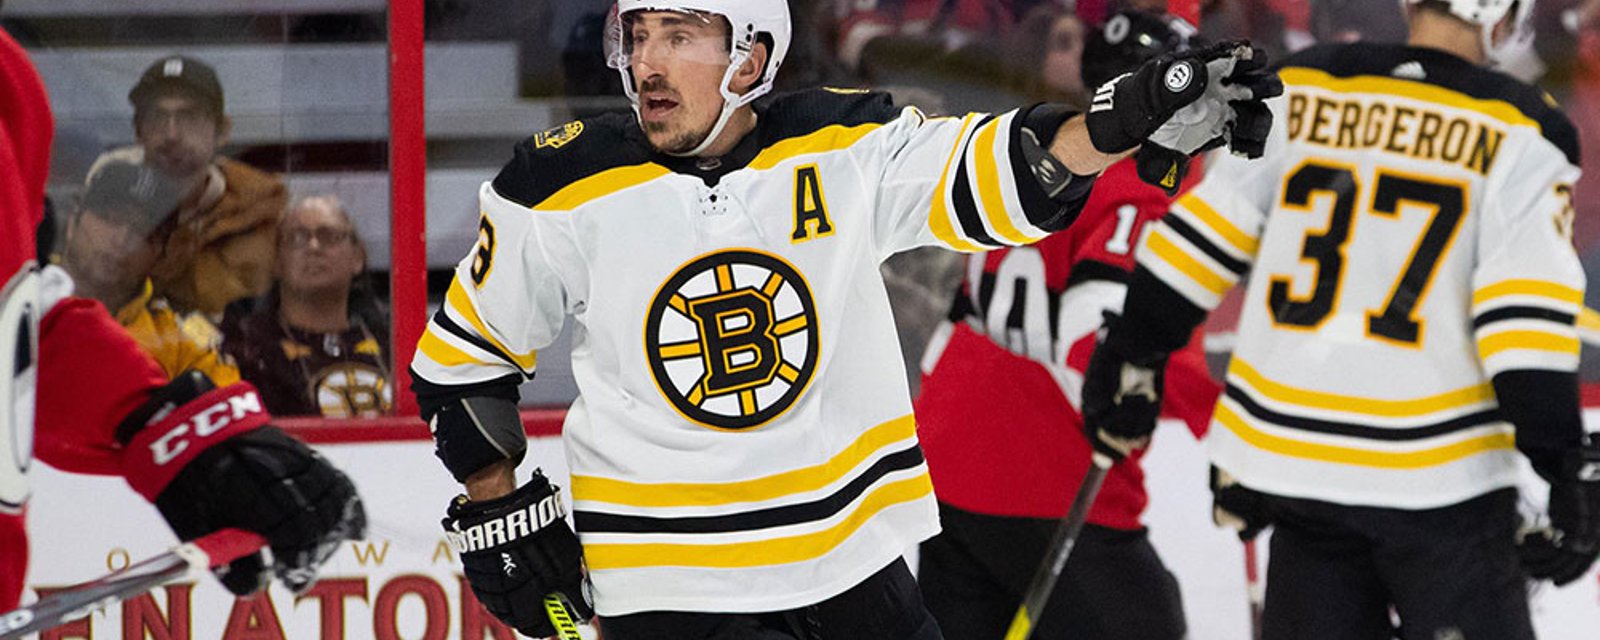 Marchand and Bergeron unhappy with Coach Cassidy?